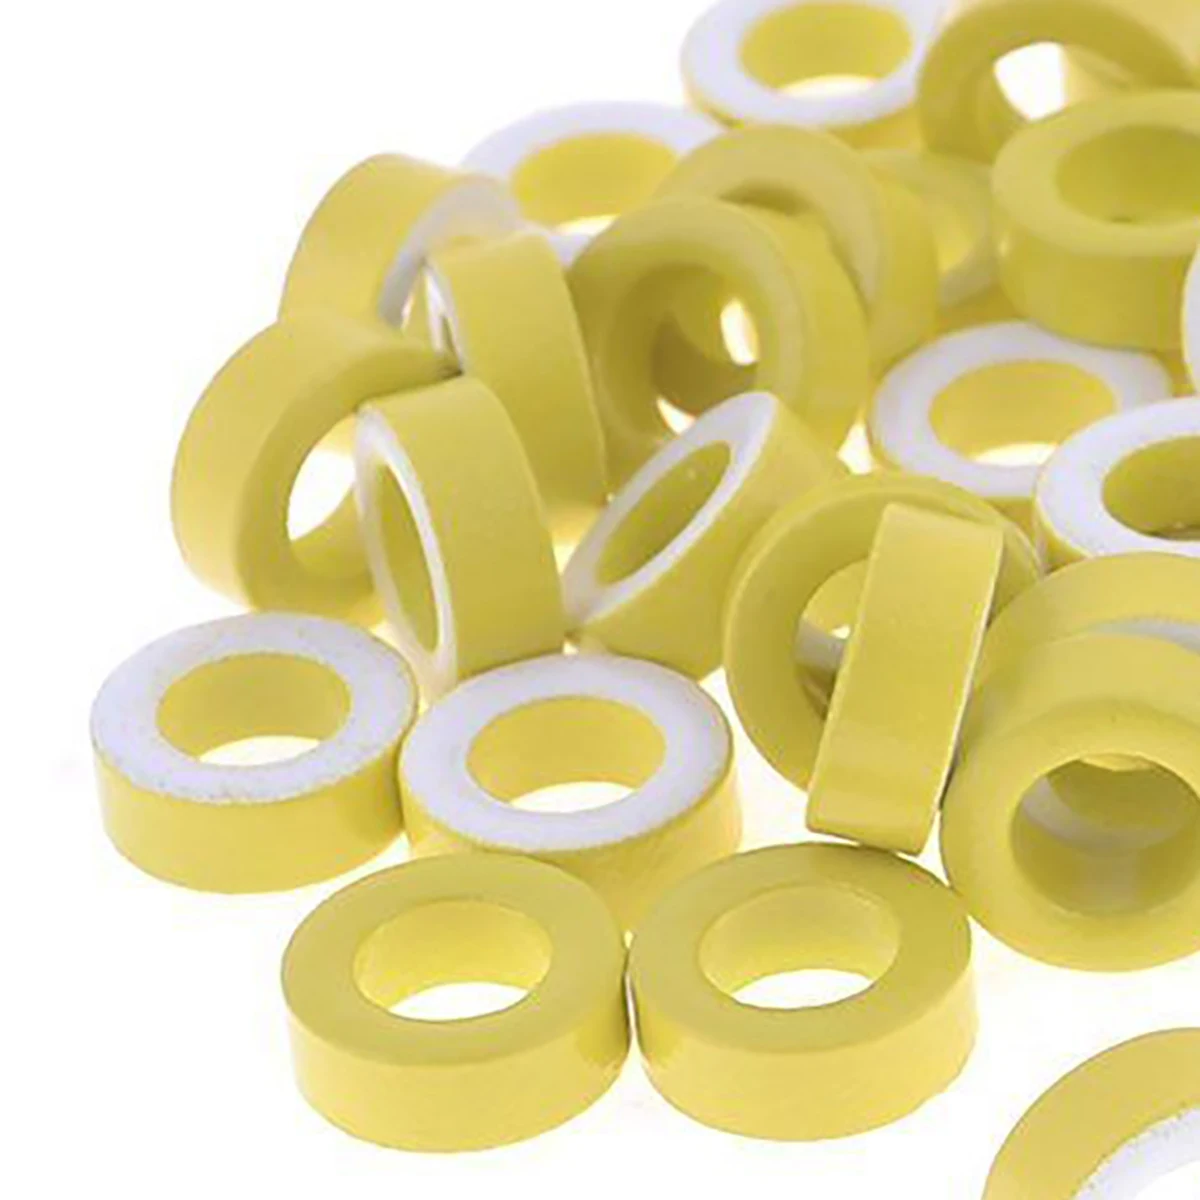 50pcs Toroid Ferrite Cores T50-26  Yellow White Ring Iron Cores For Power Transformers Inductors 7.5mm Inner Diameter